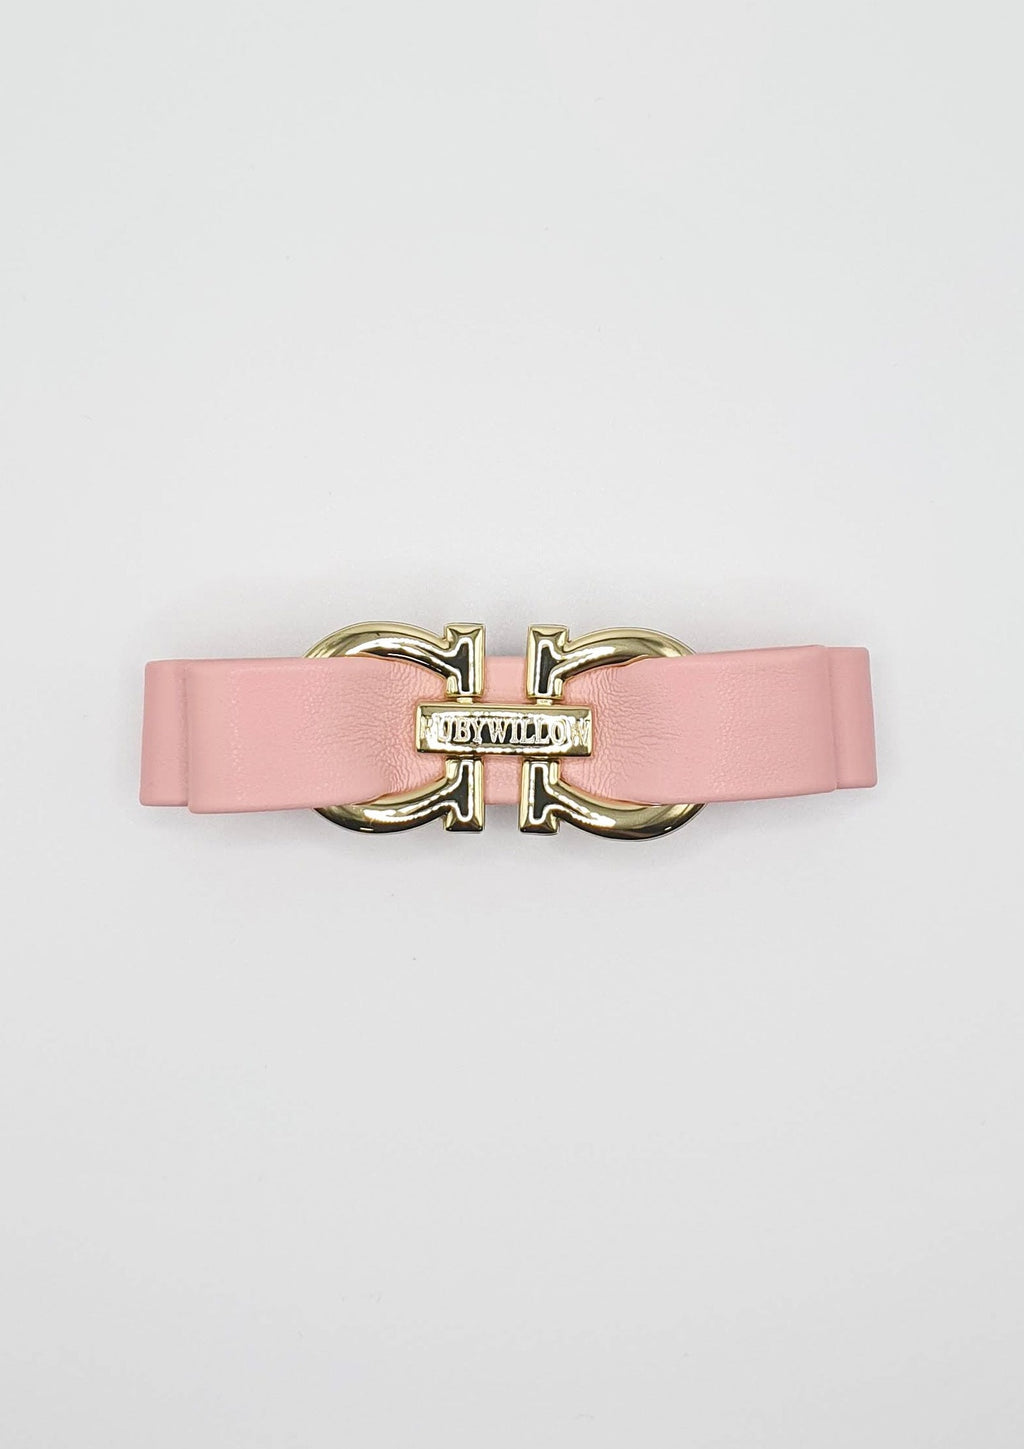 Valentina - Pale Pink Faux Leather RW Buckle Barrette Hair Clip